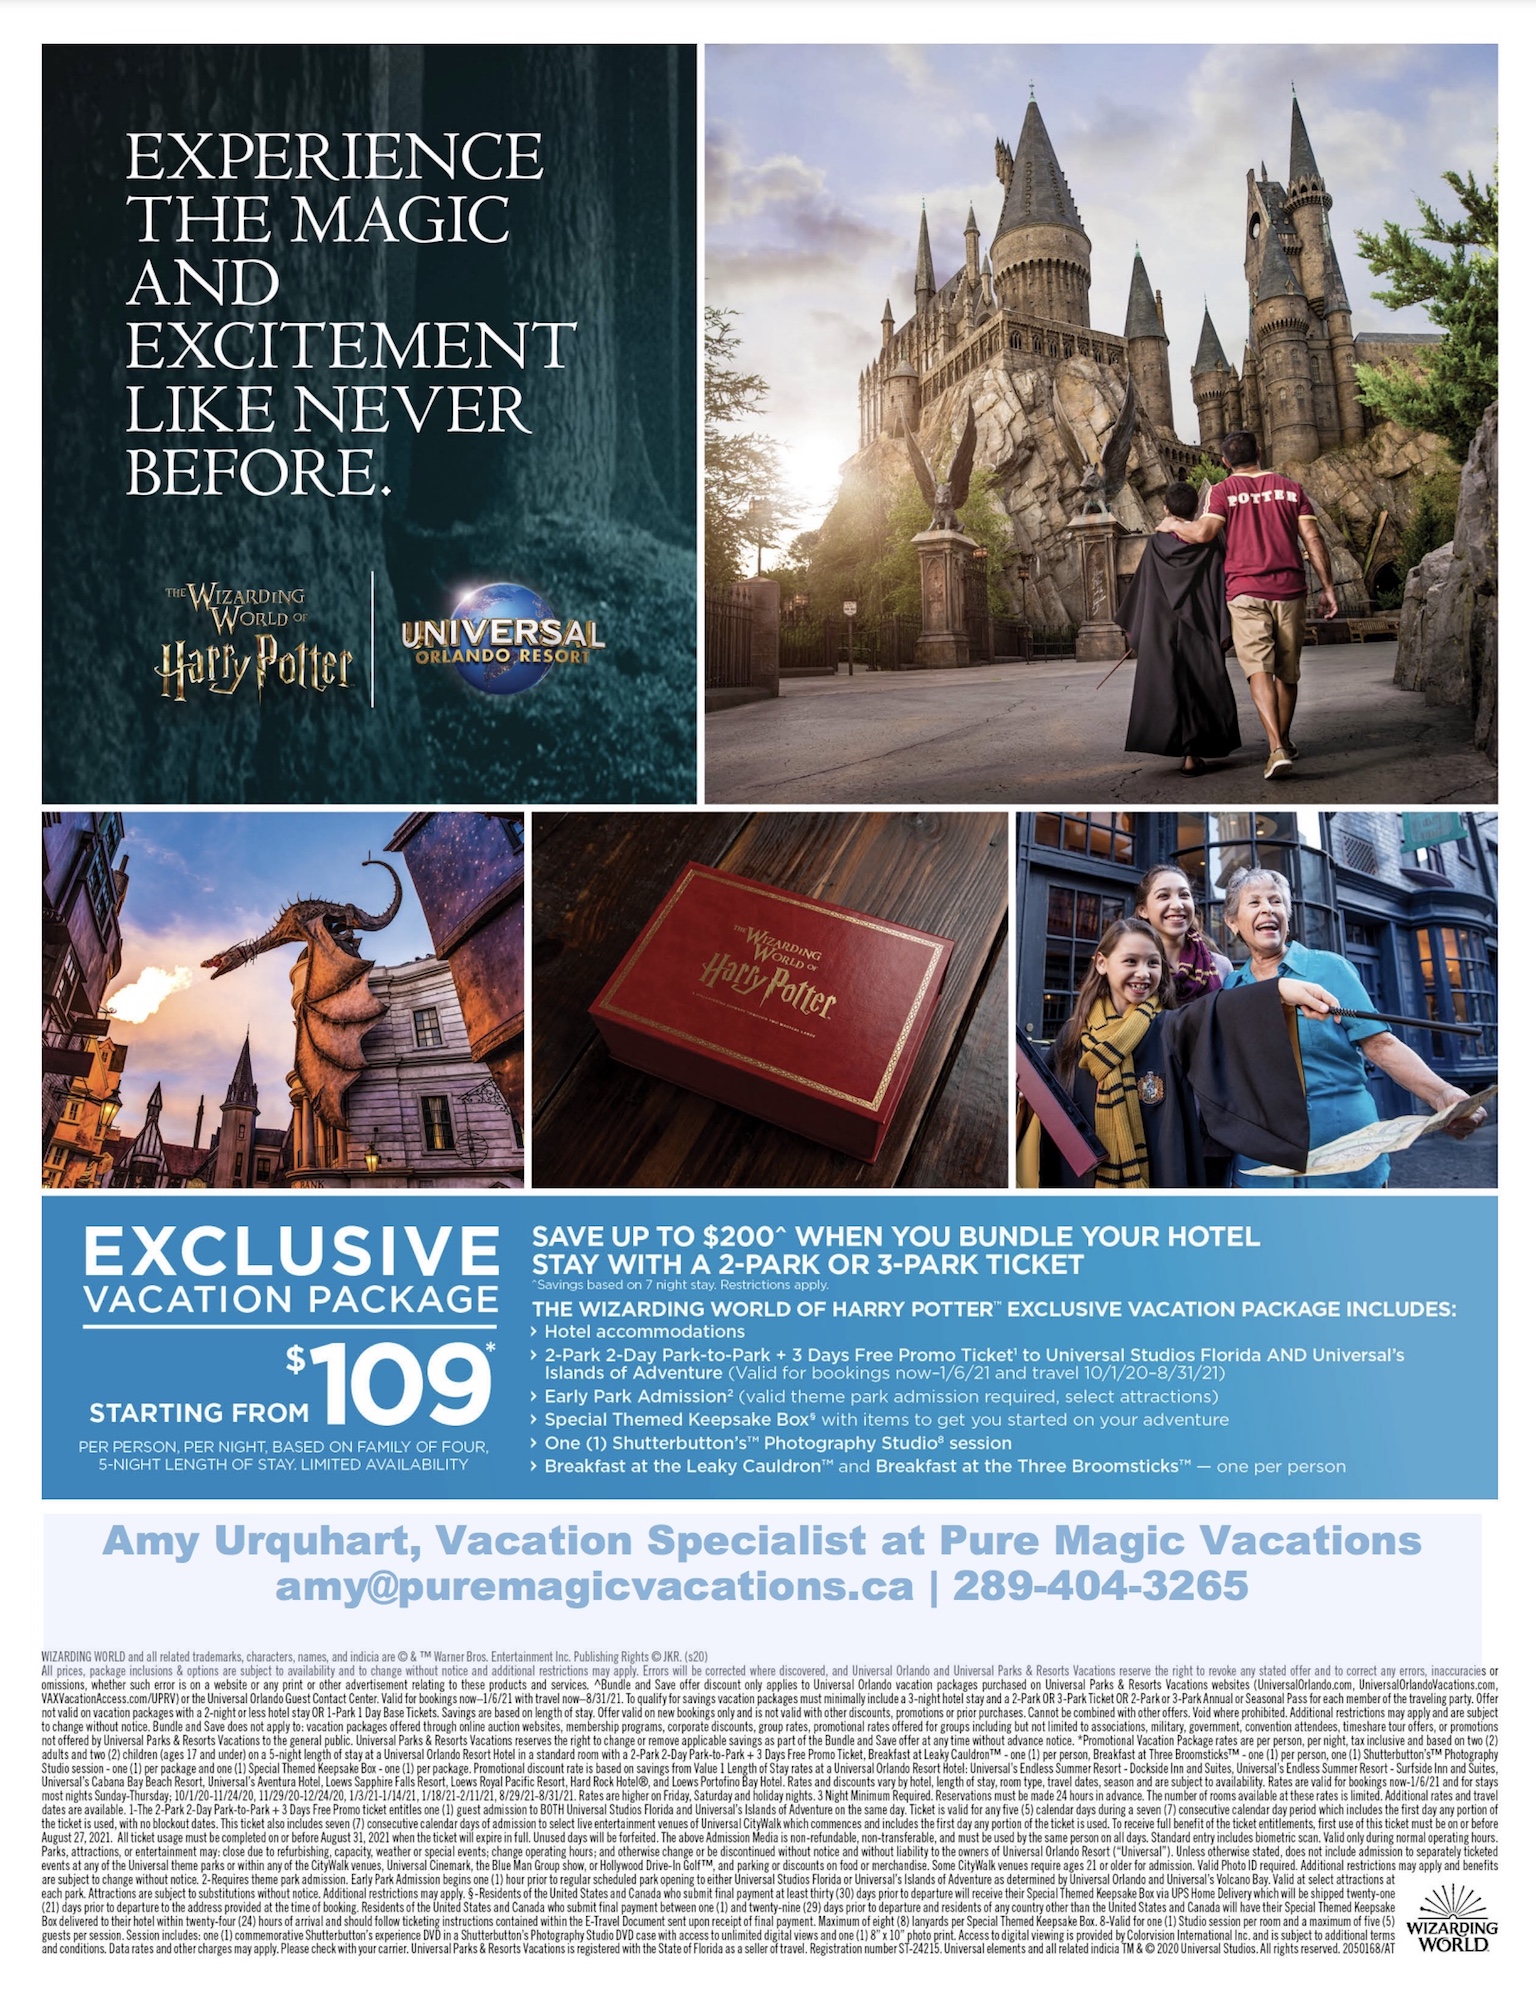 Magical Harry Potter Vacation Package At Universal Orlando Resort 